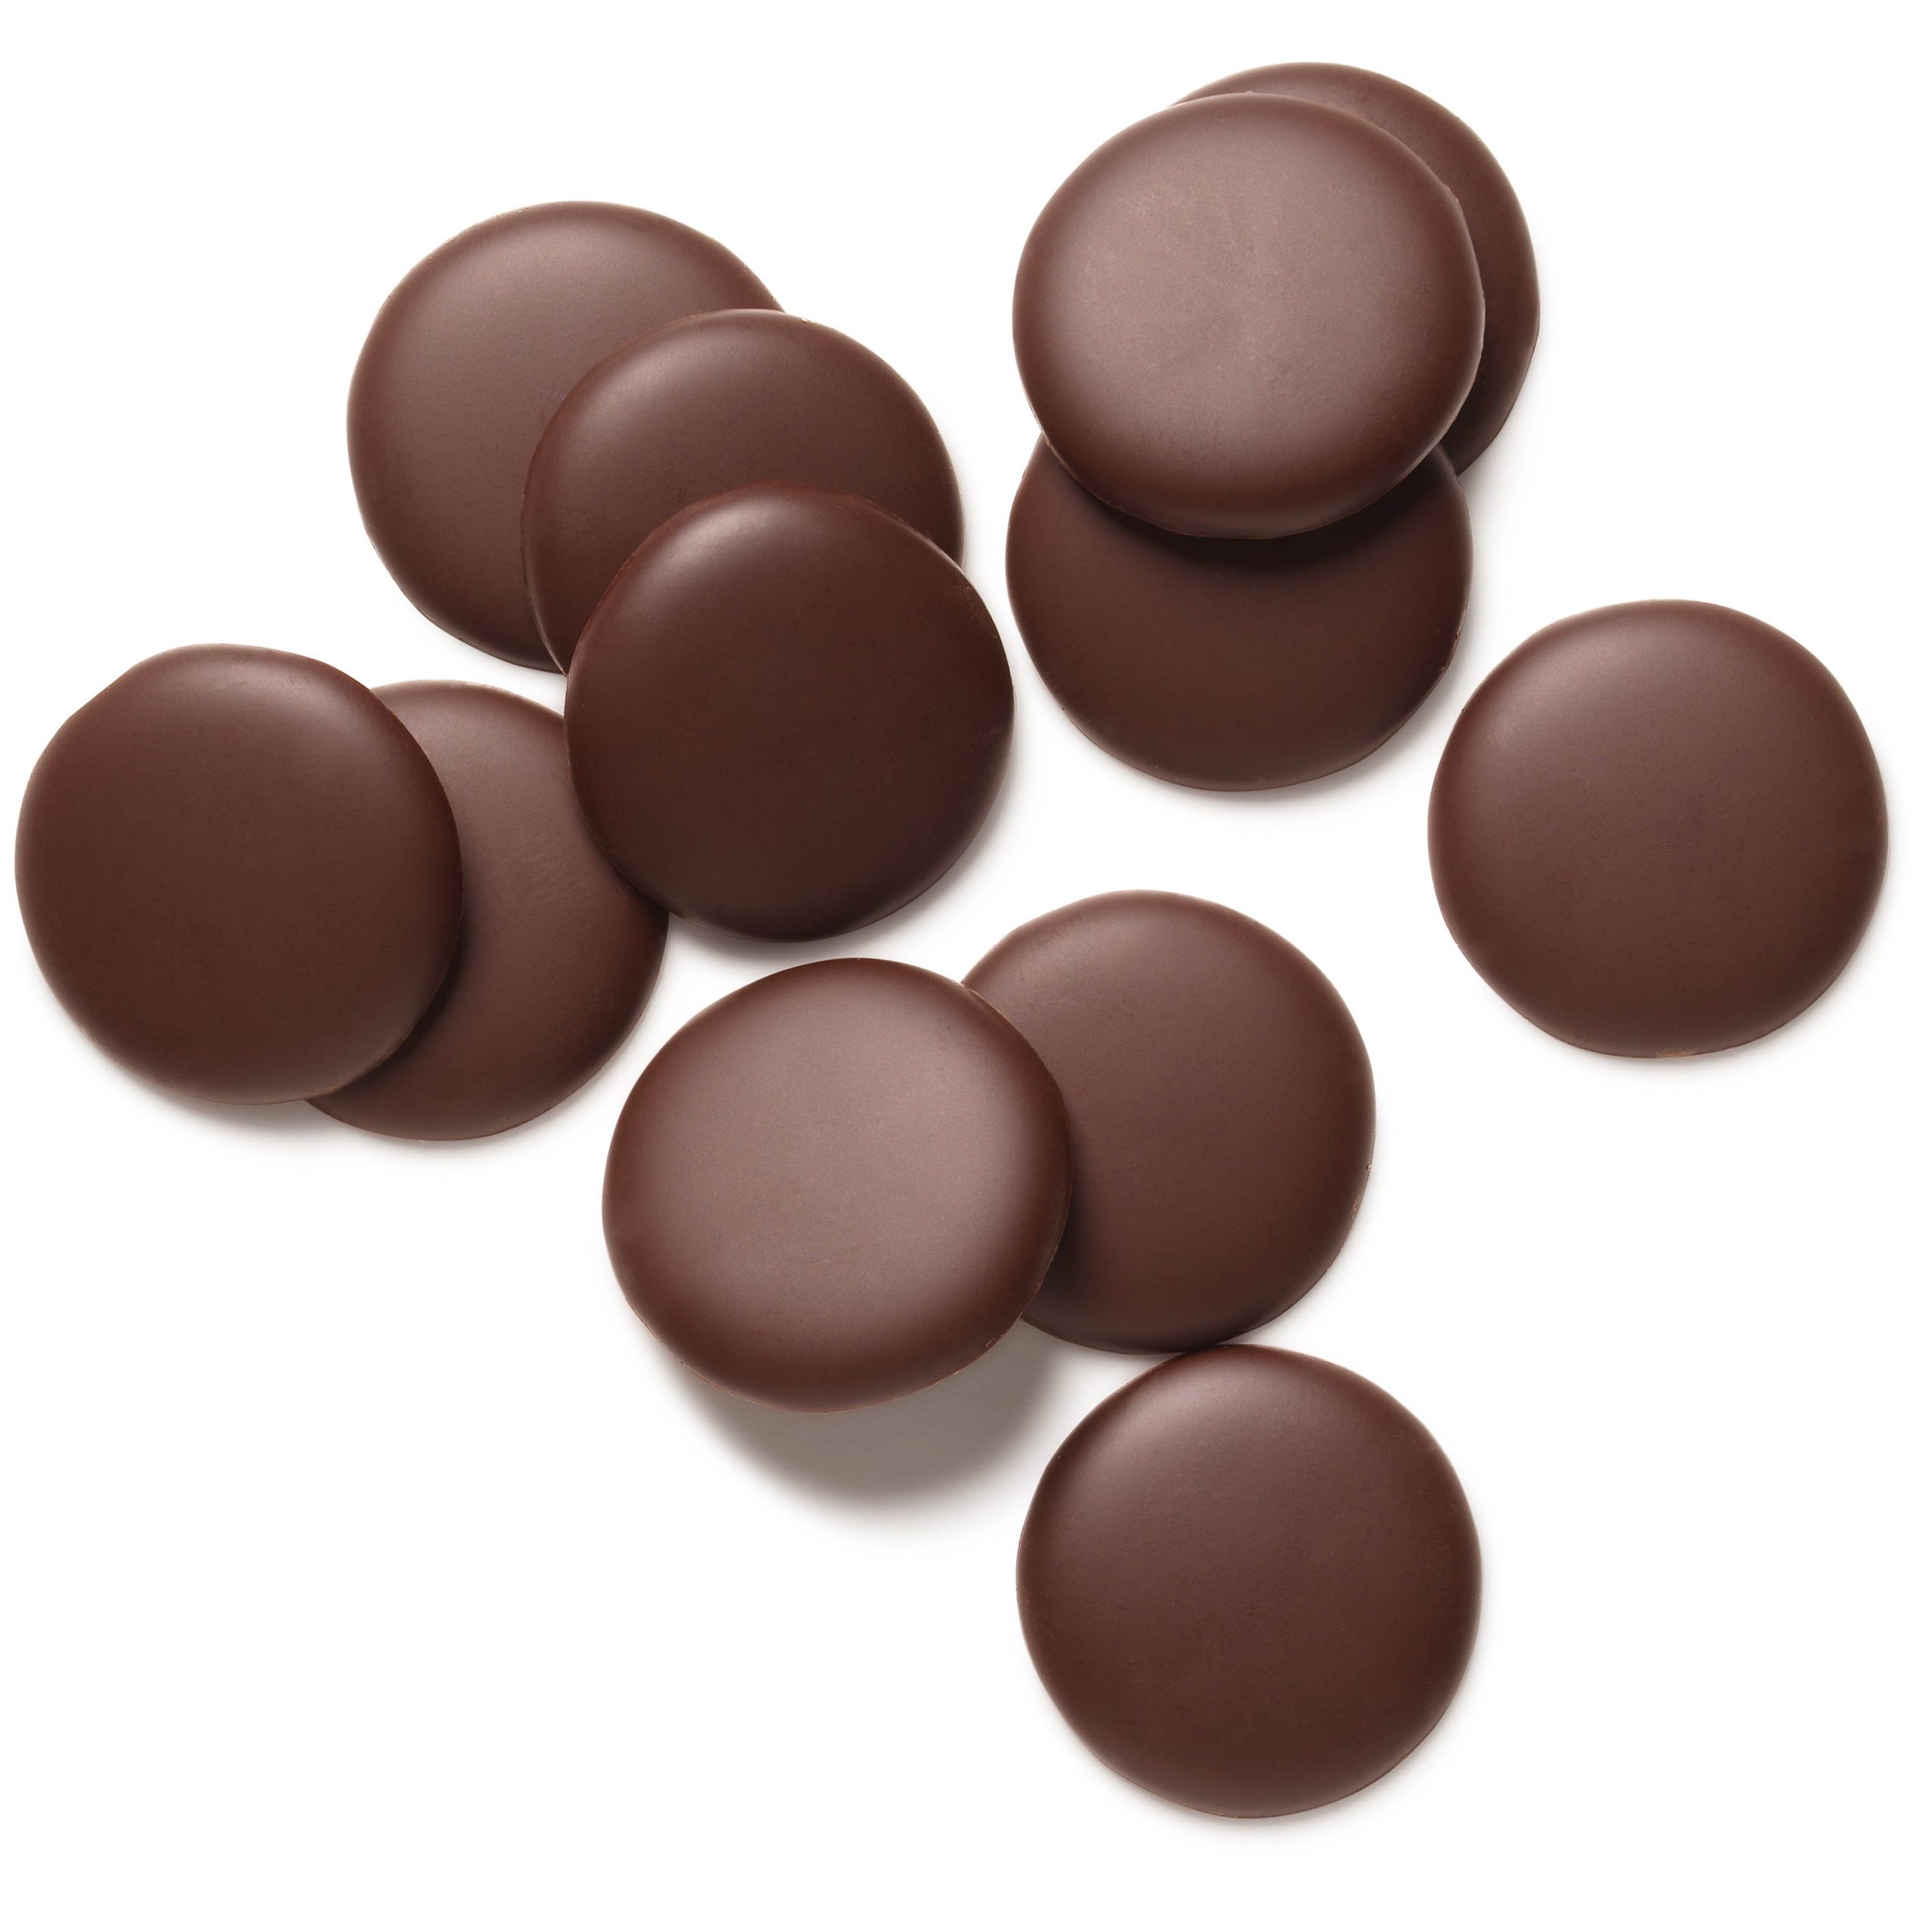 Guittard Onyx 72% Dark Couverture Chocolate Wafers